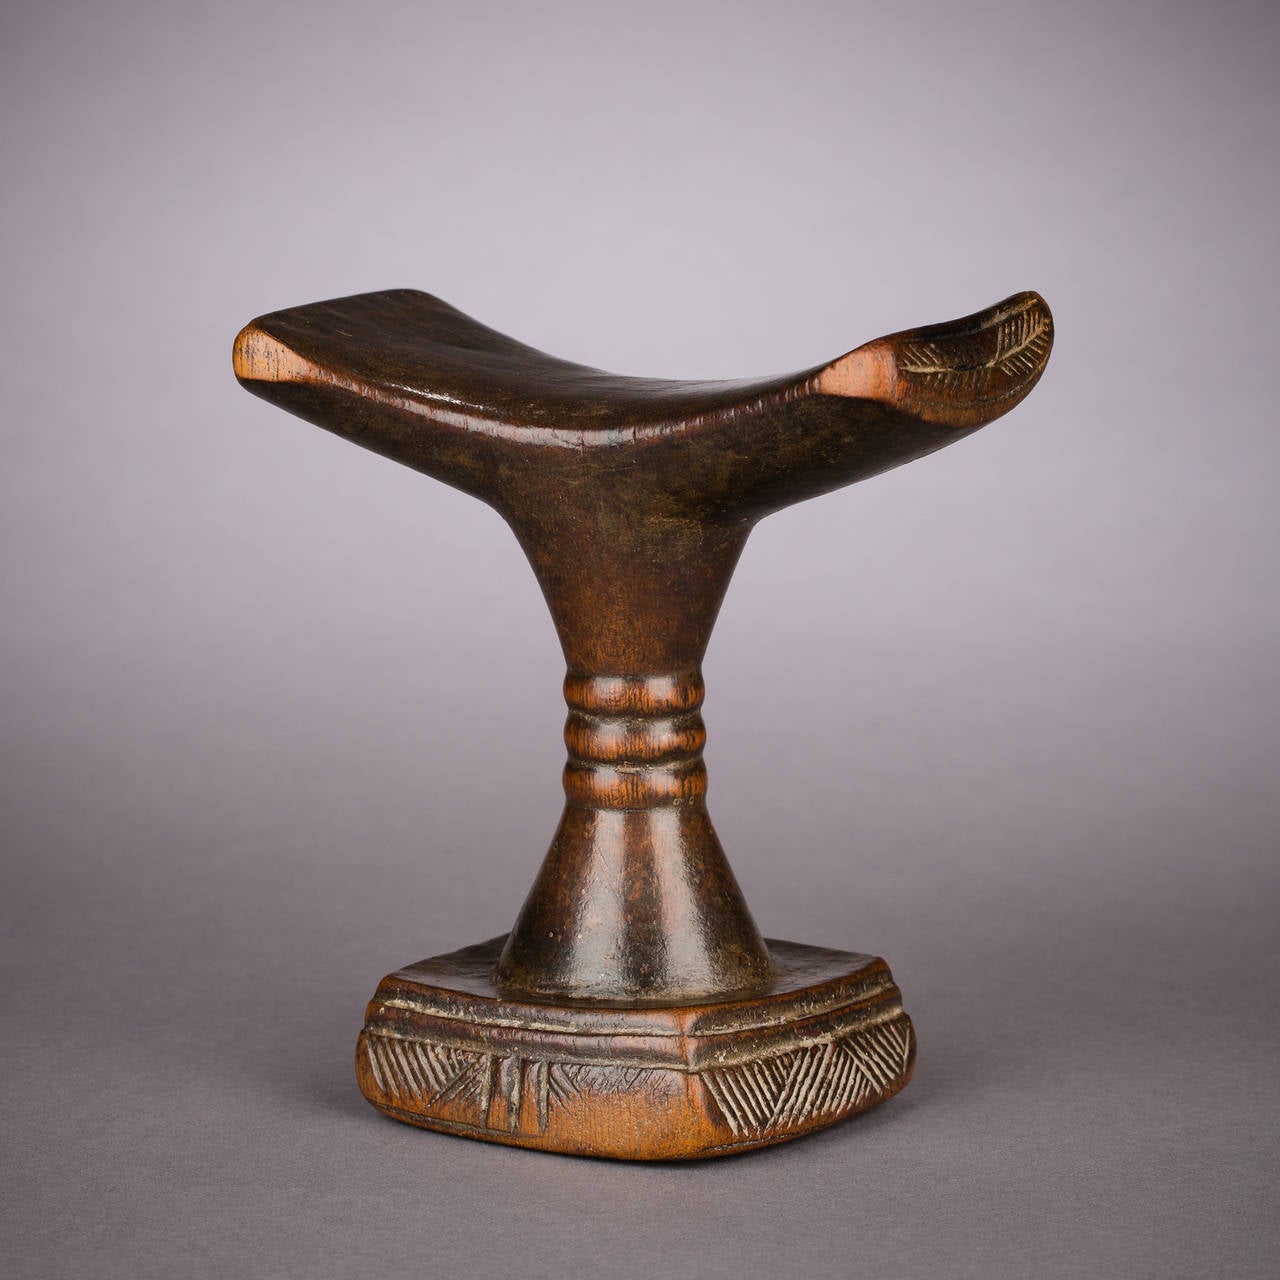 A stately, exalted quality of form marks this gorgeous Luba headrest. At just over six inches in height, the piece achieves an almost monumental stature with its strong, upreaching silhouette and finely proportioned, anchoring base. The lovely,